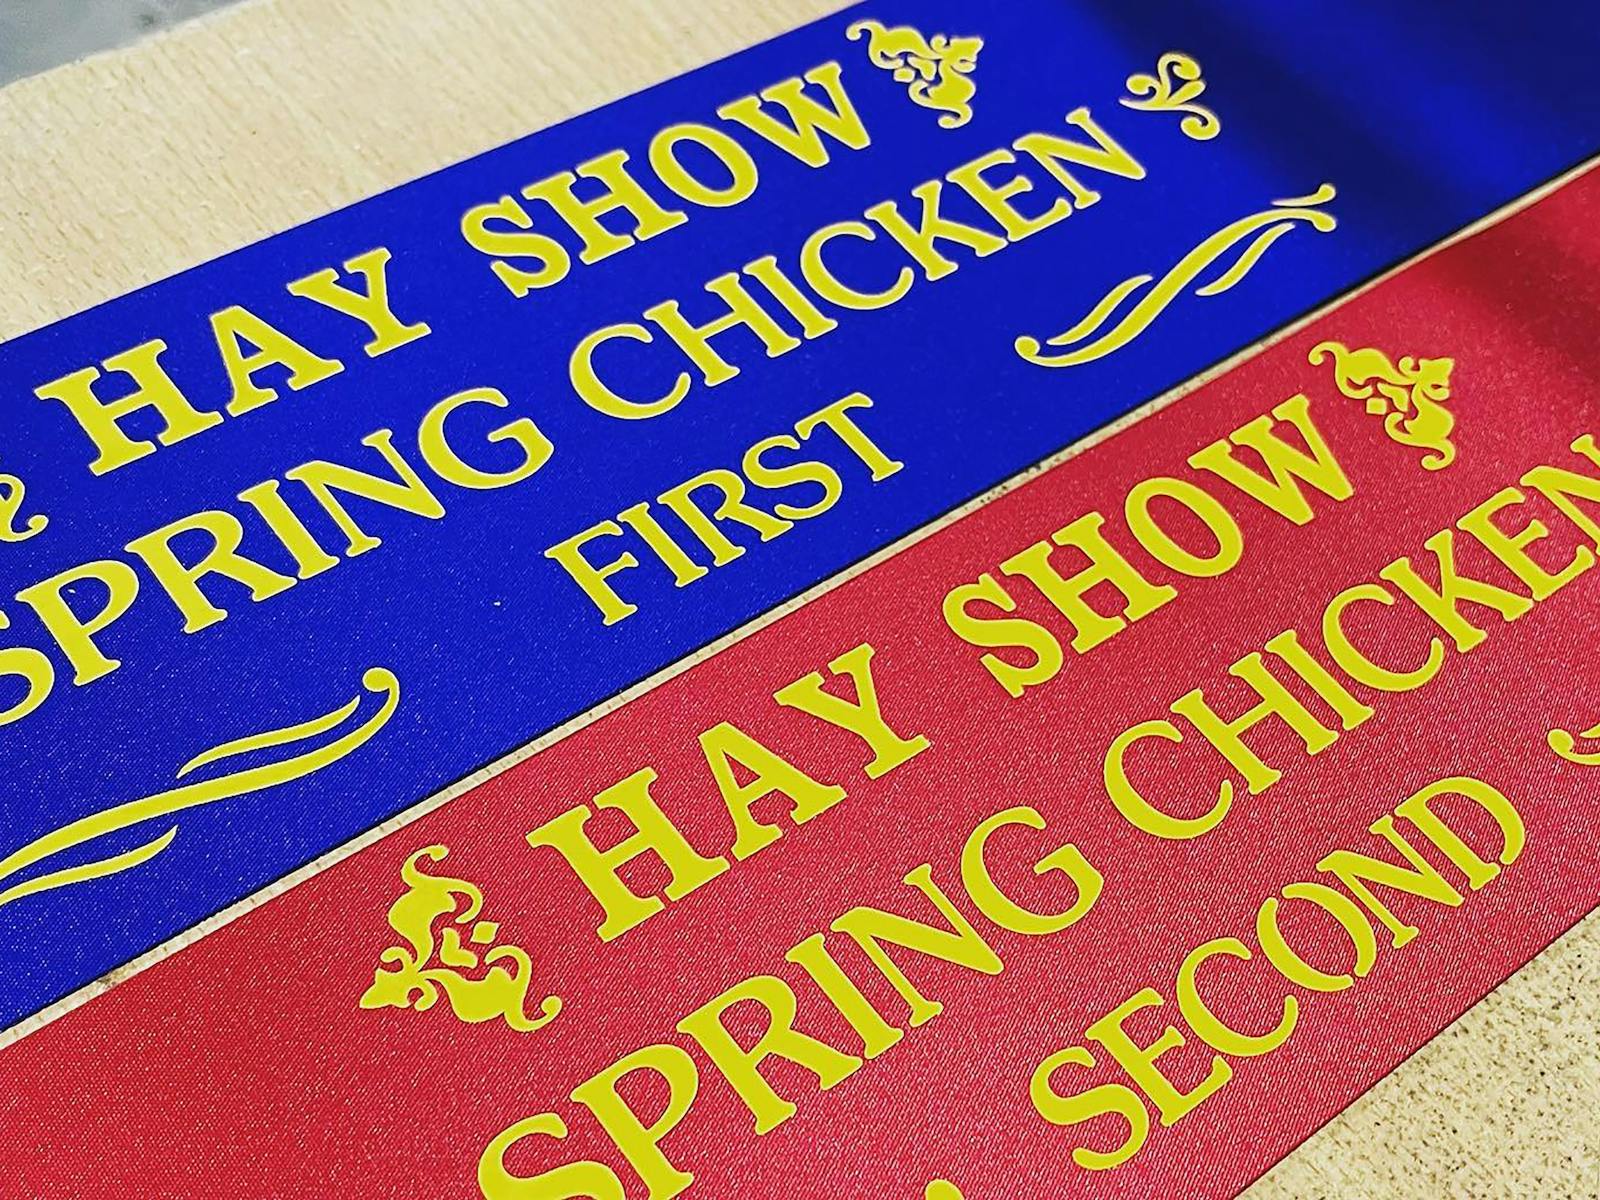 Image for Annual Hay Show